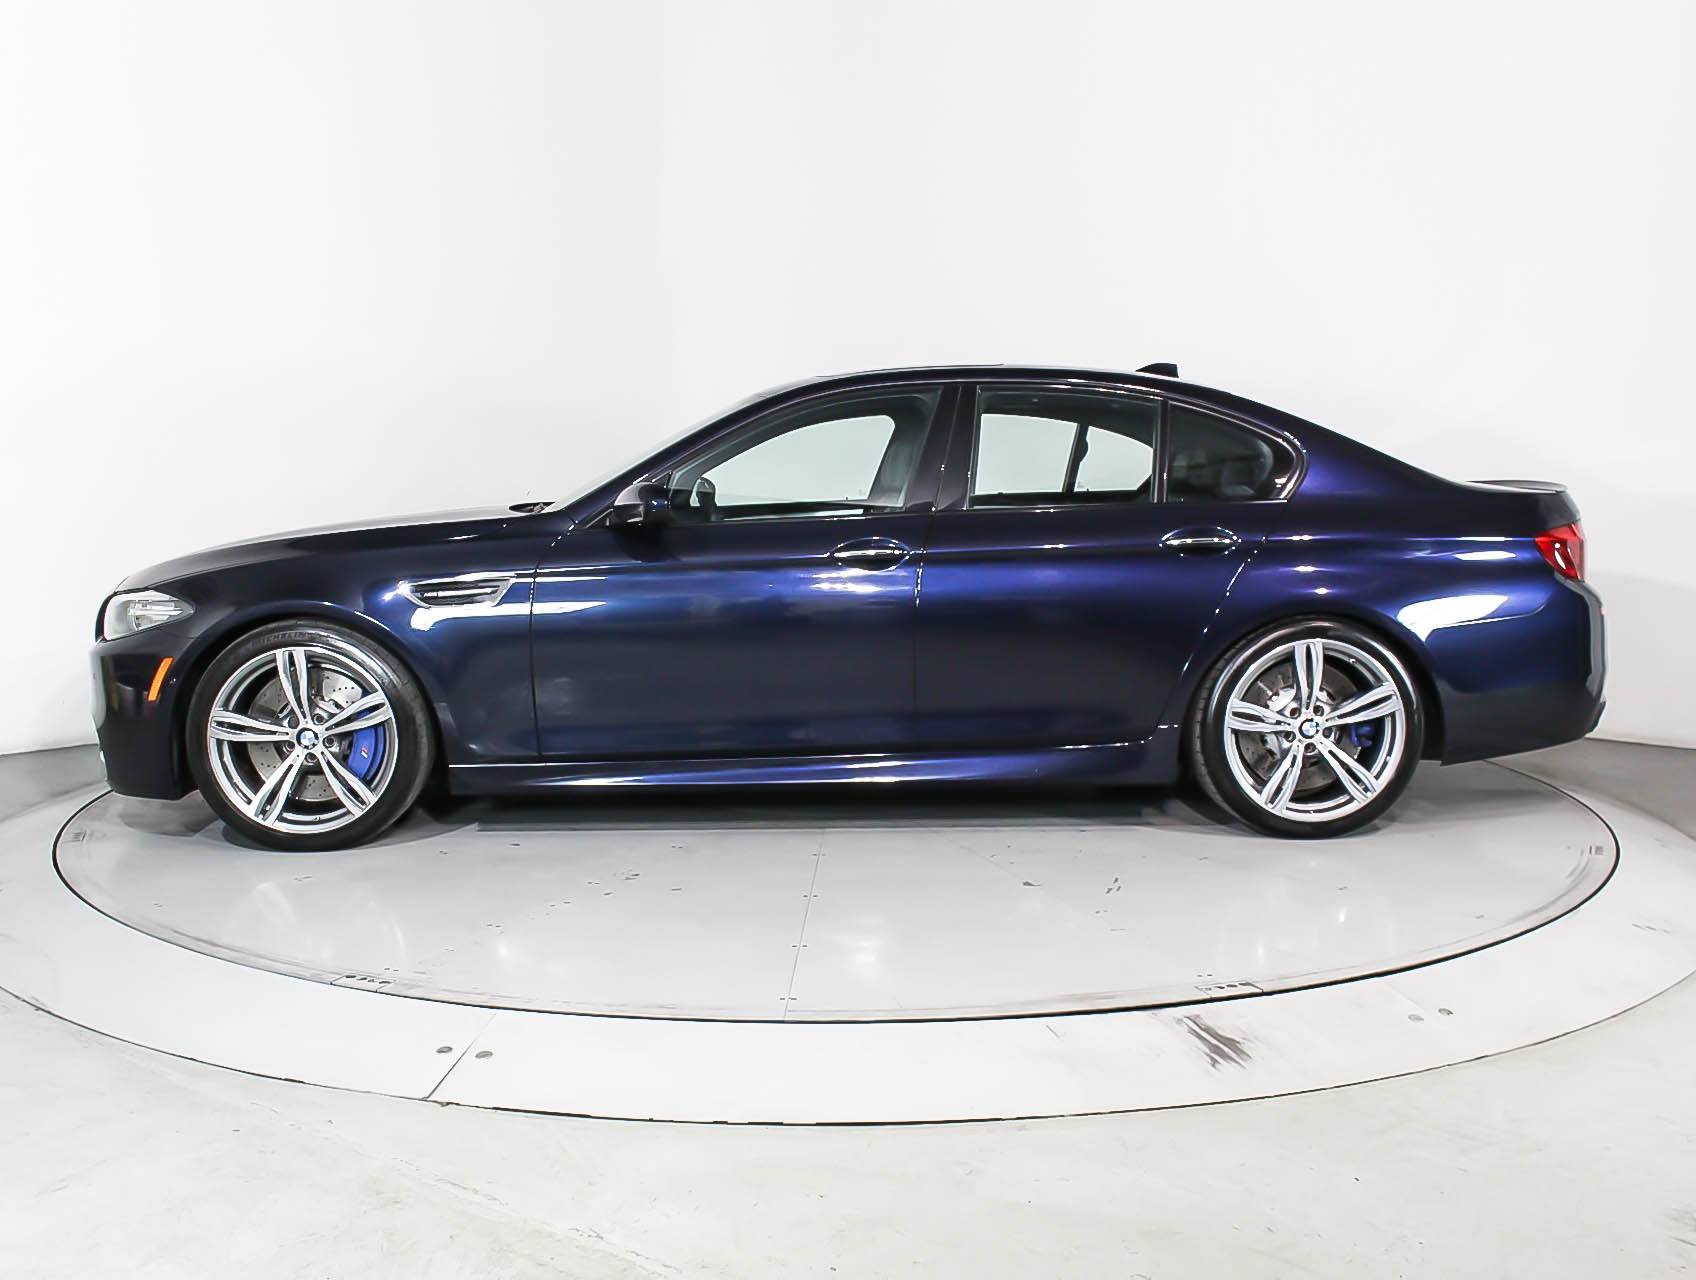 Florida Fine Cars - Used BMW M5 2014 HOLLYWOOD COMPETITION PACKAGE